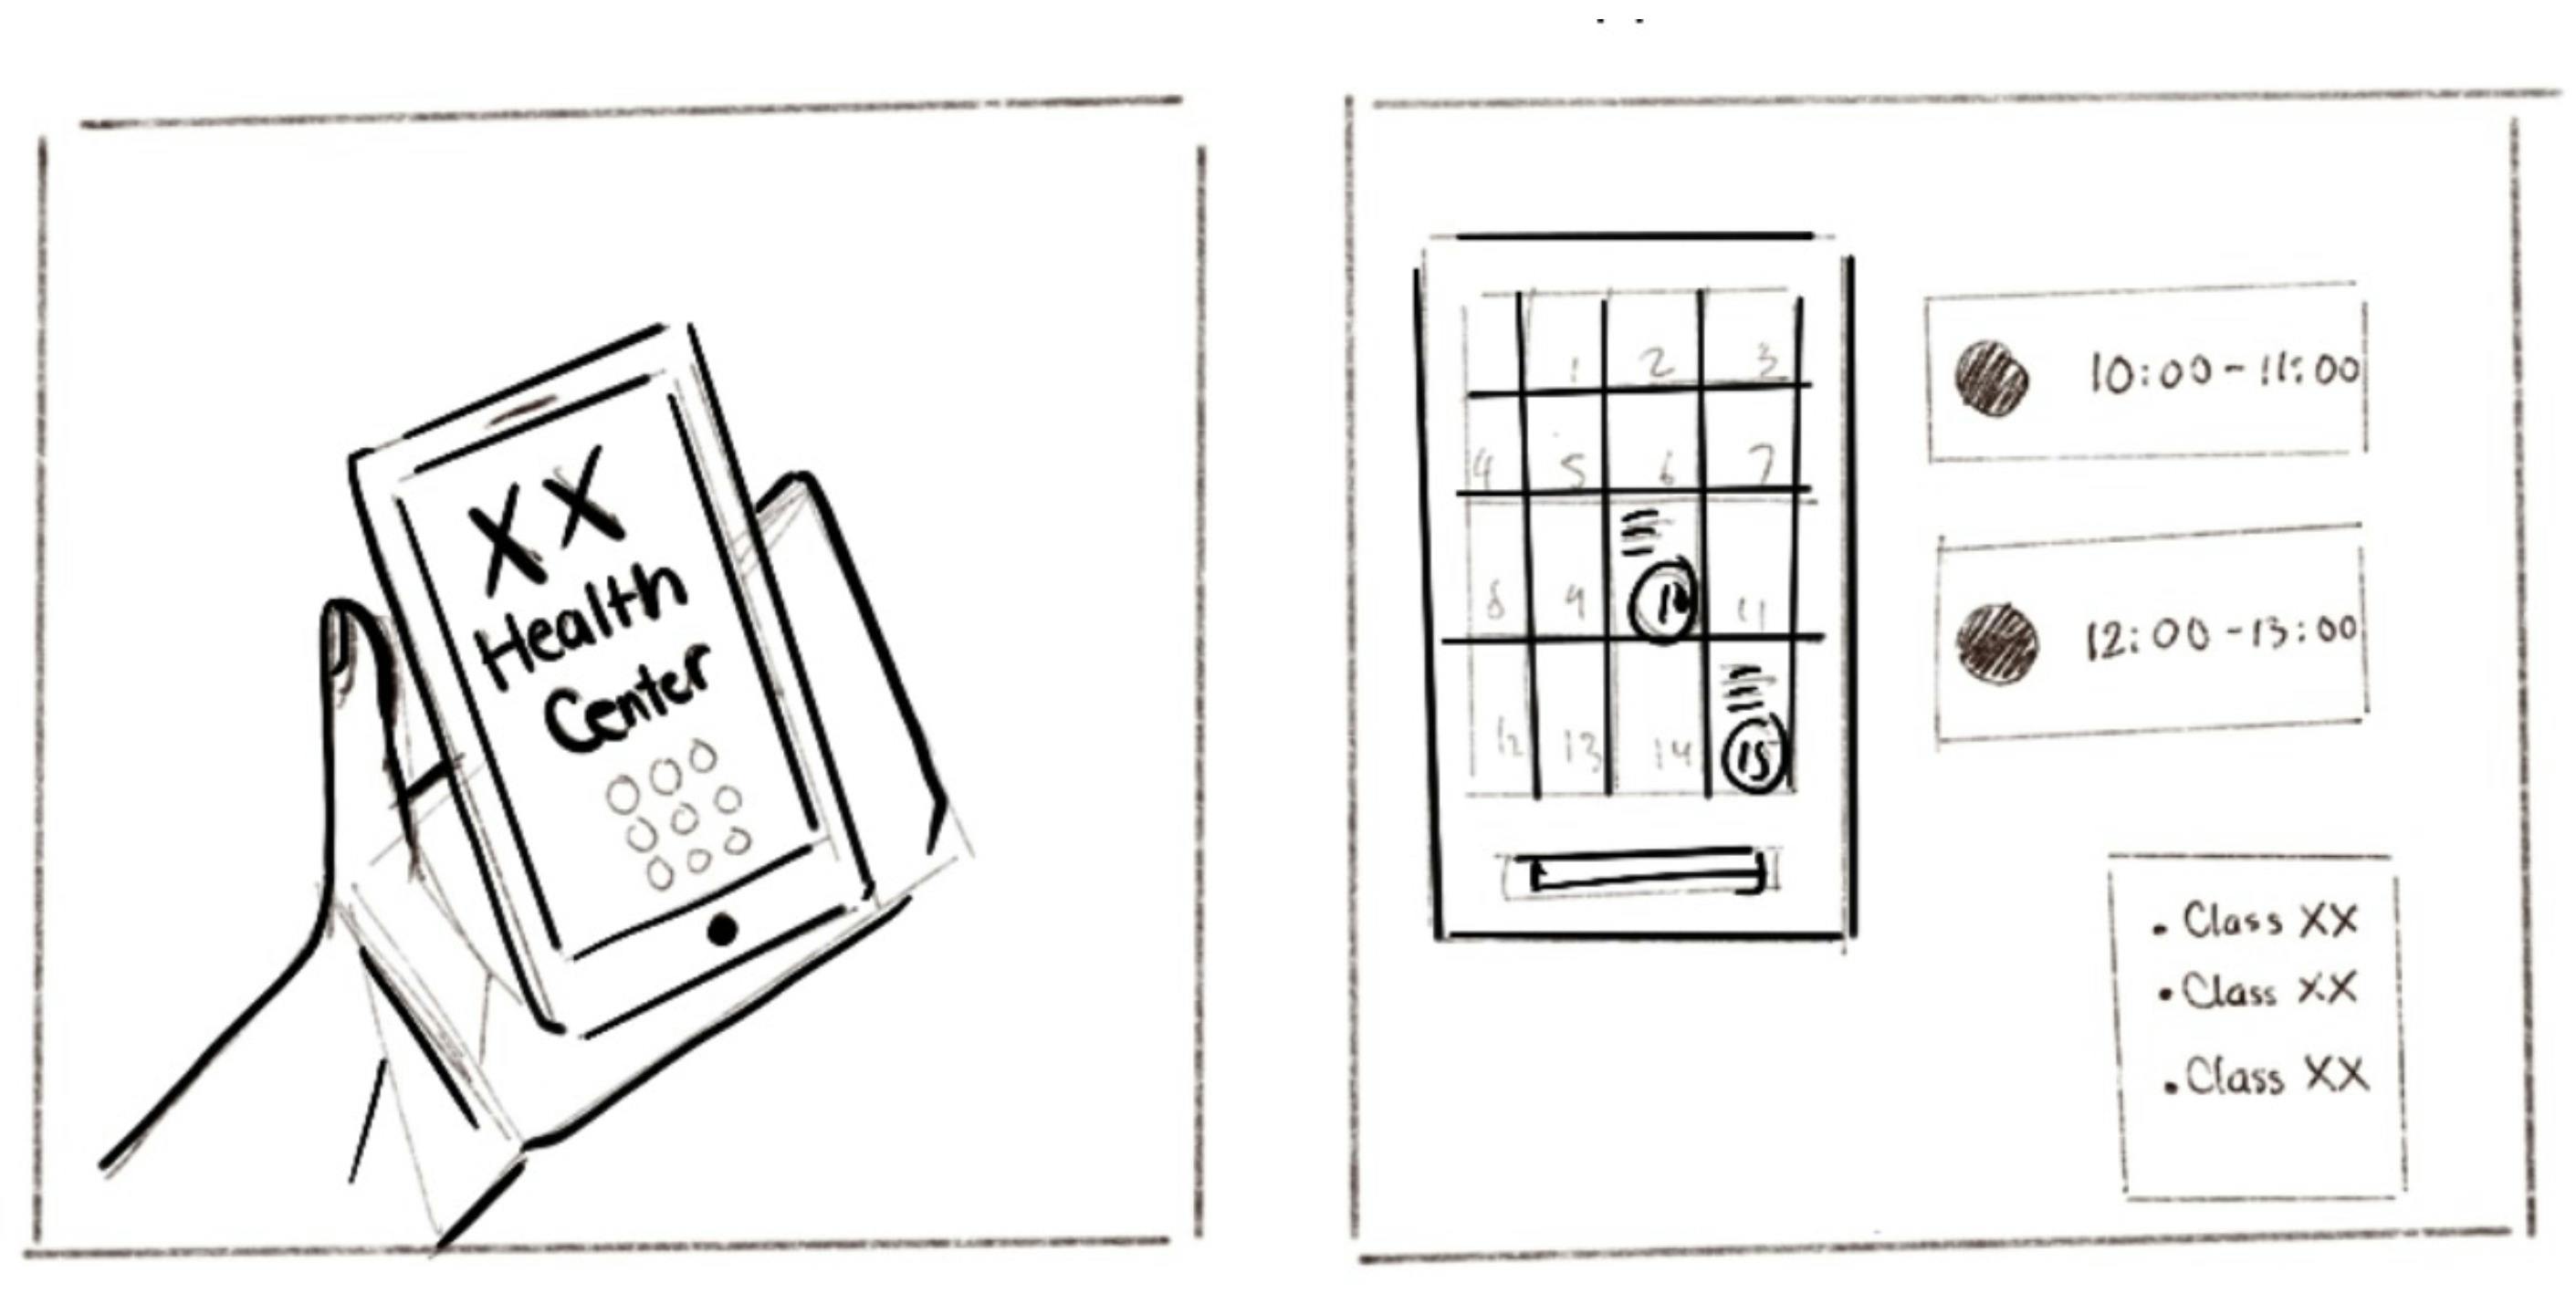 Storyboard sketch with 2 frames showing a phone calling the health center and a student calendar with classes and meeting times